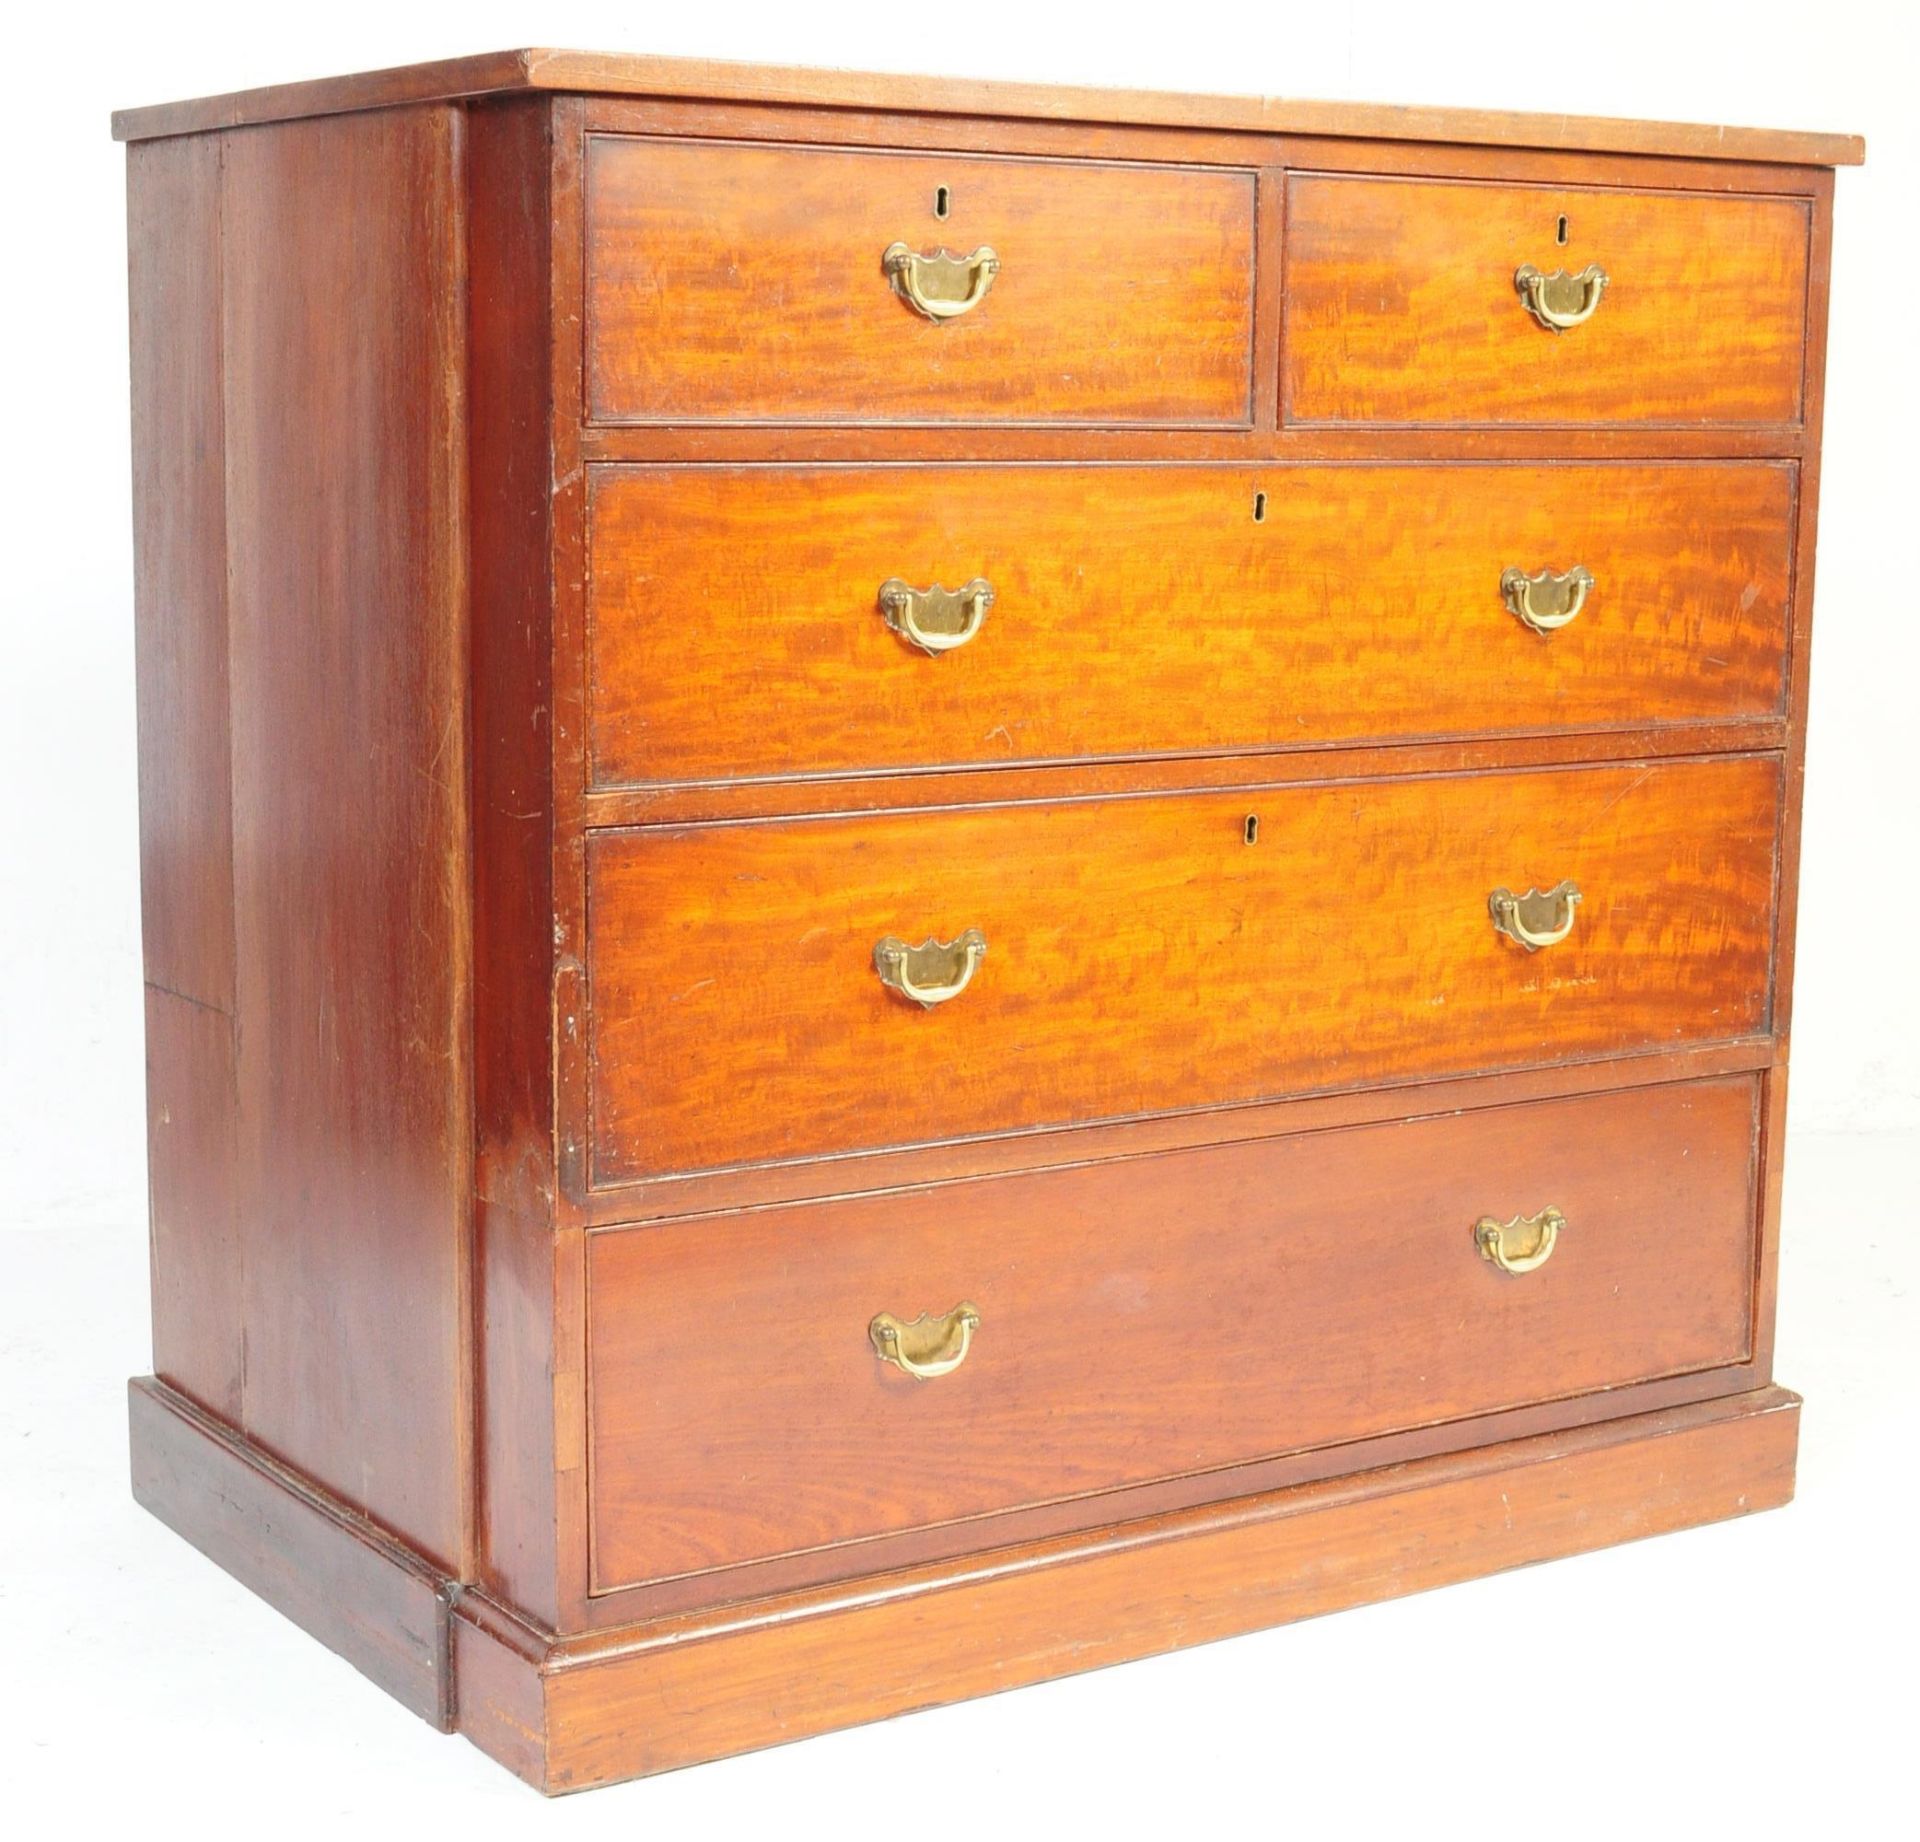 EDWARDIAN EARLY 20TH CENTURY MAHOGANY CHEST OF DRAWERS